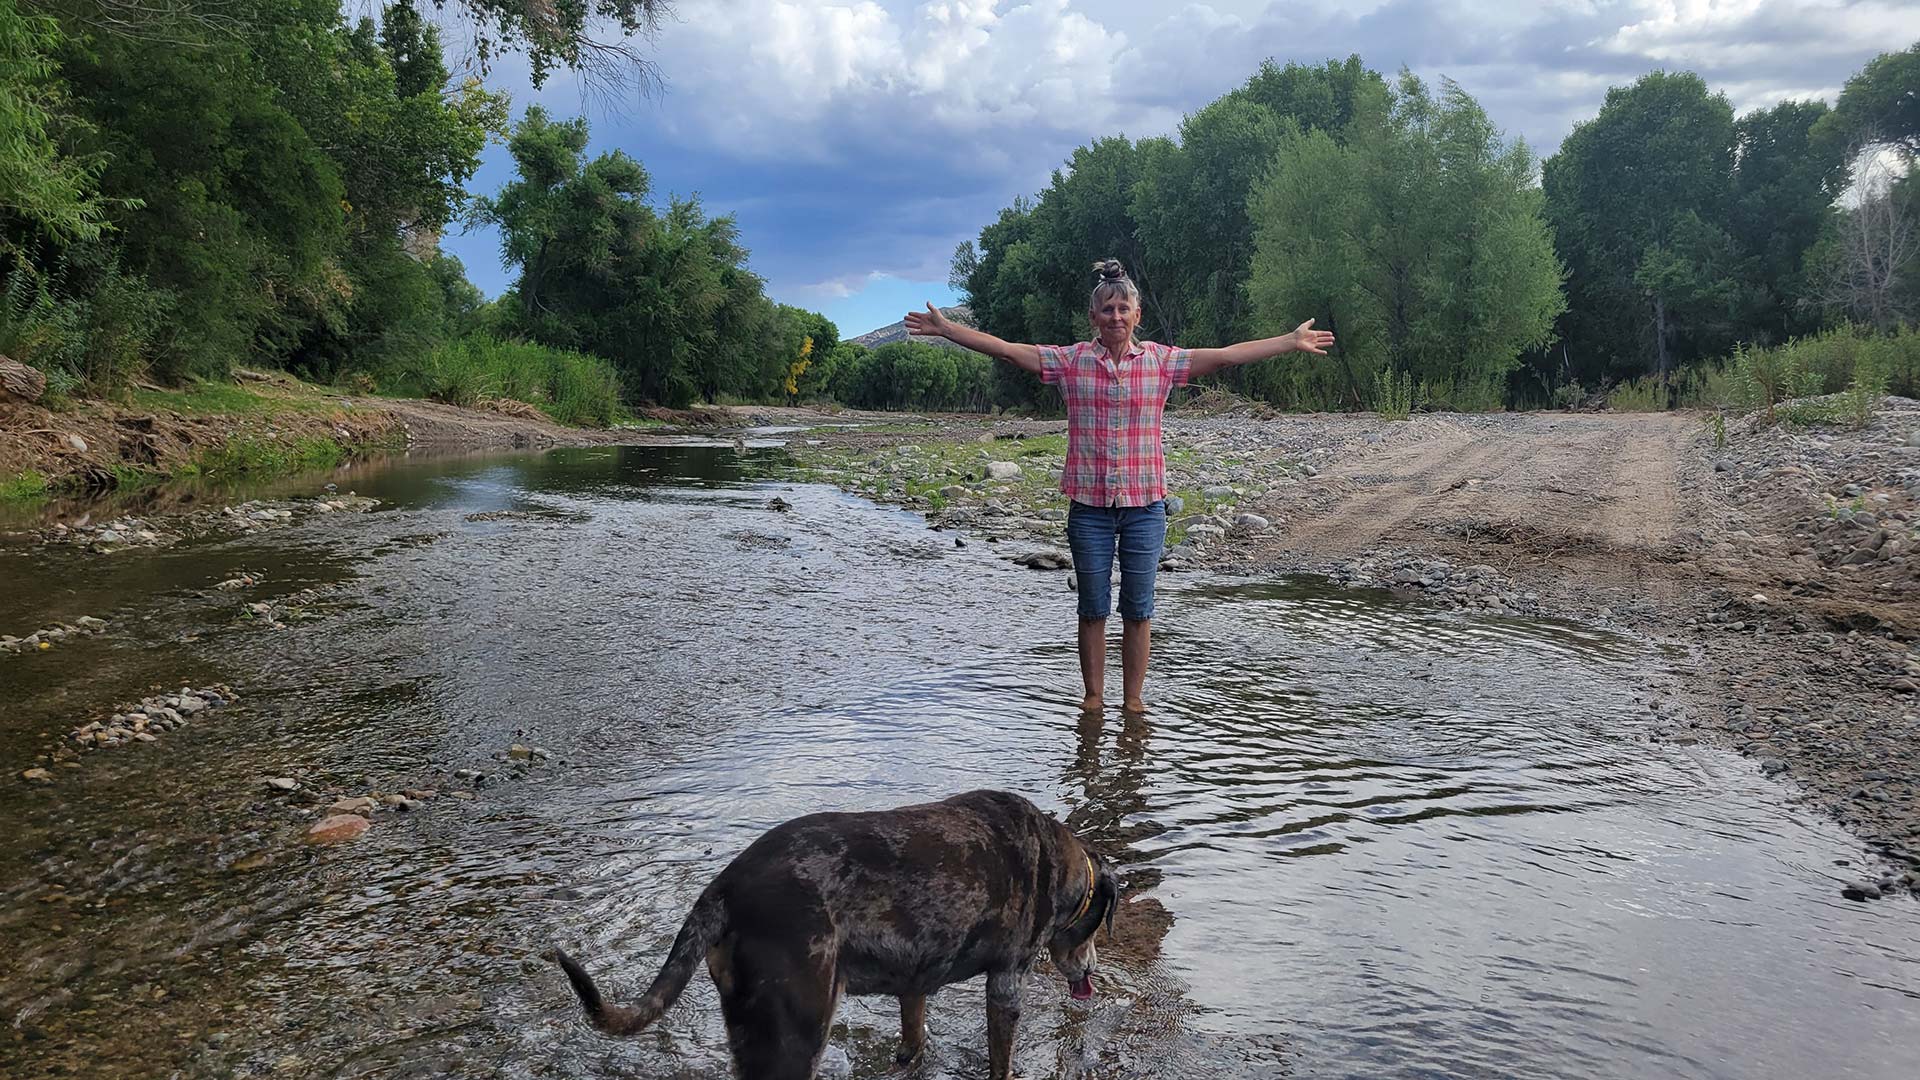 Mary Cooper and her dog, Havoc, enjoying the Hassayampa River.